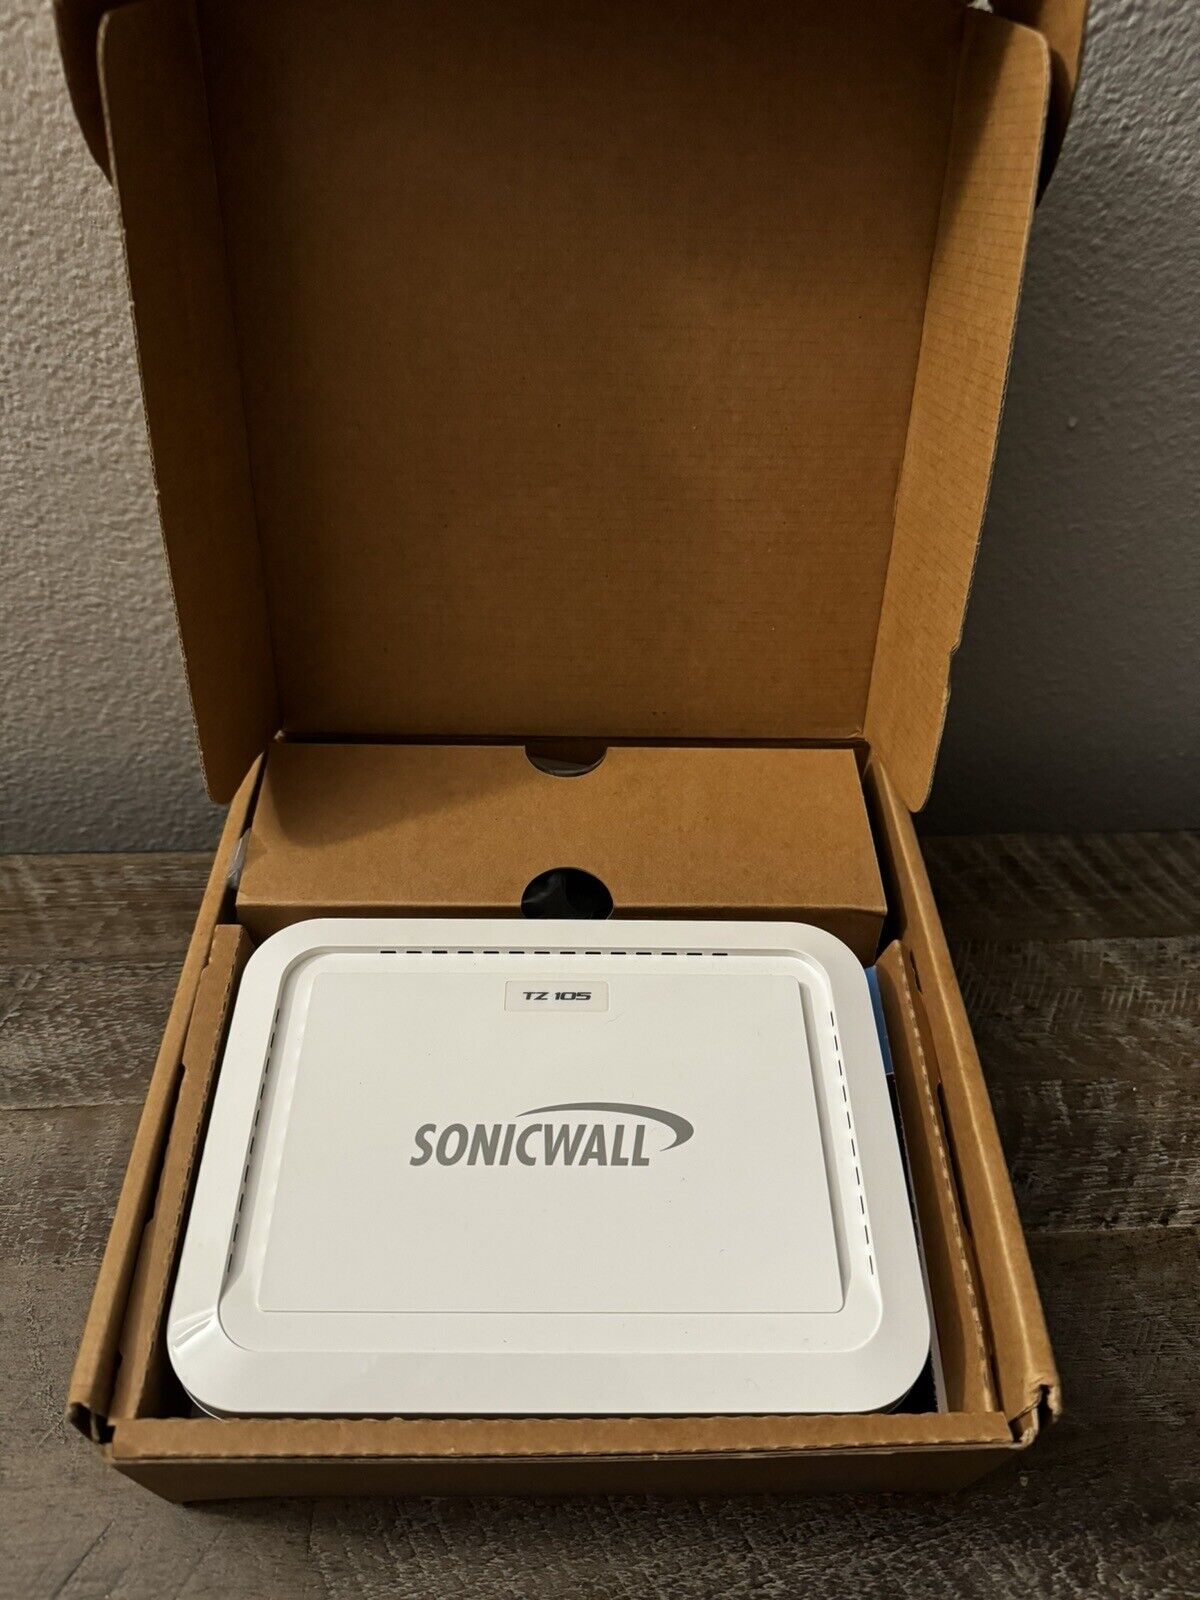 SonicWall TZ105 Network Security Firewall